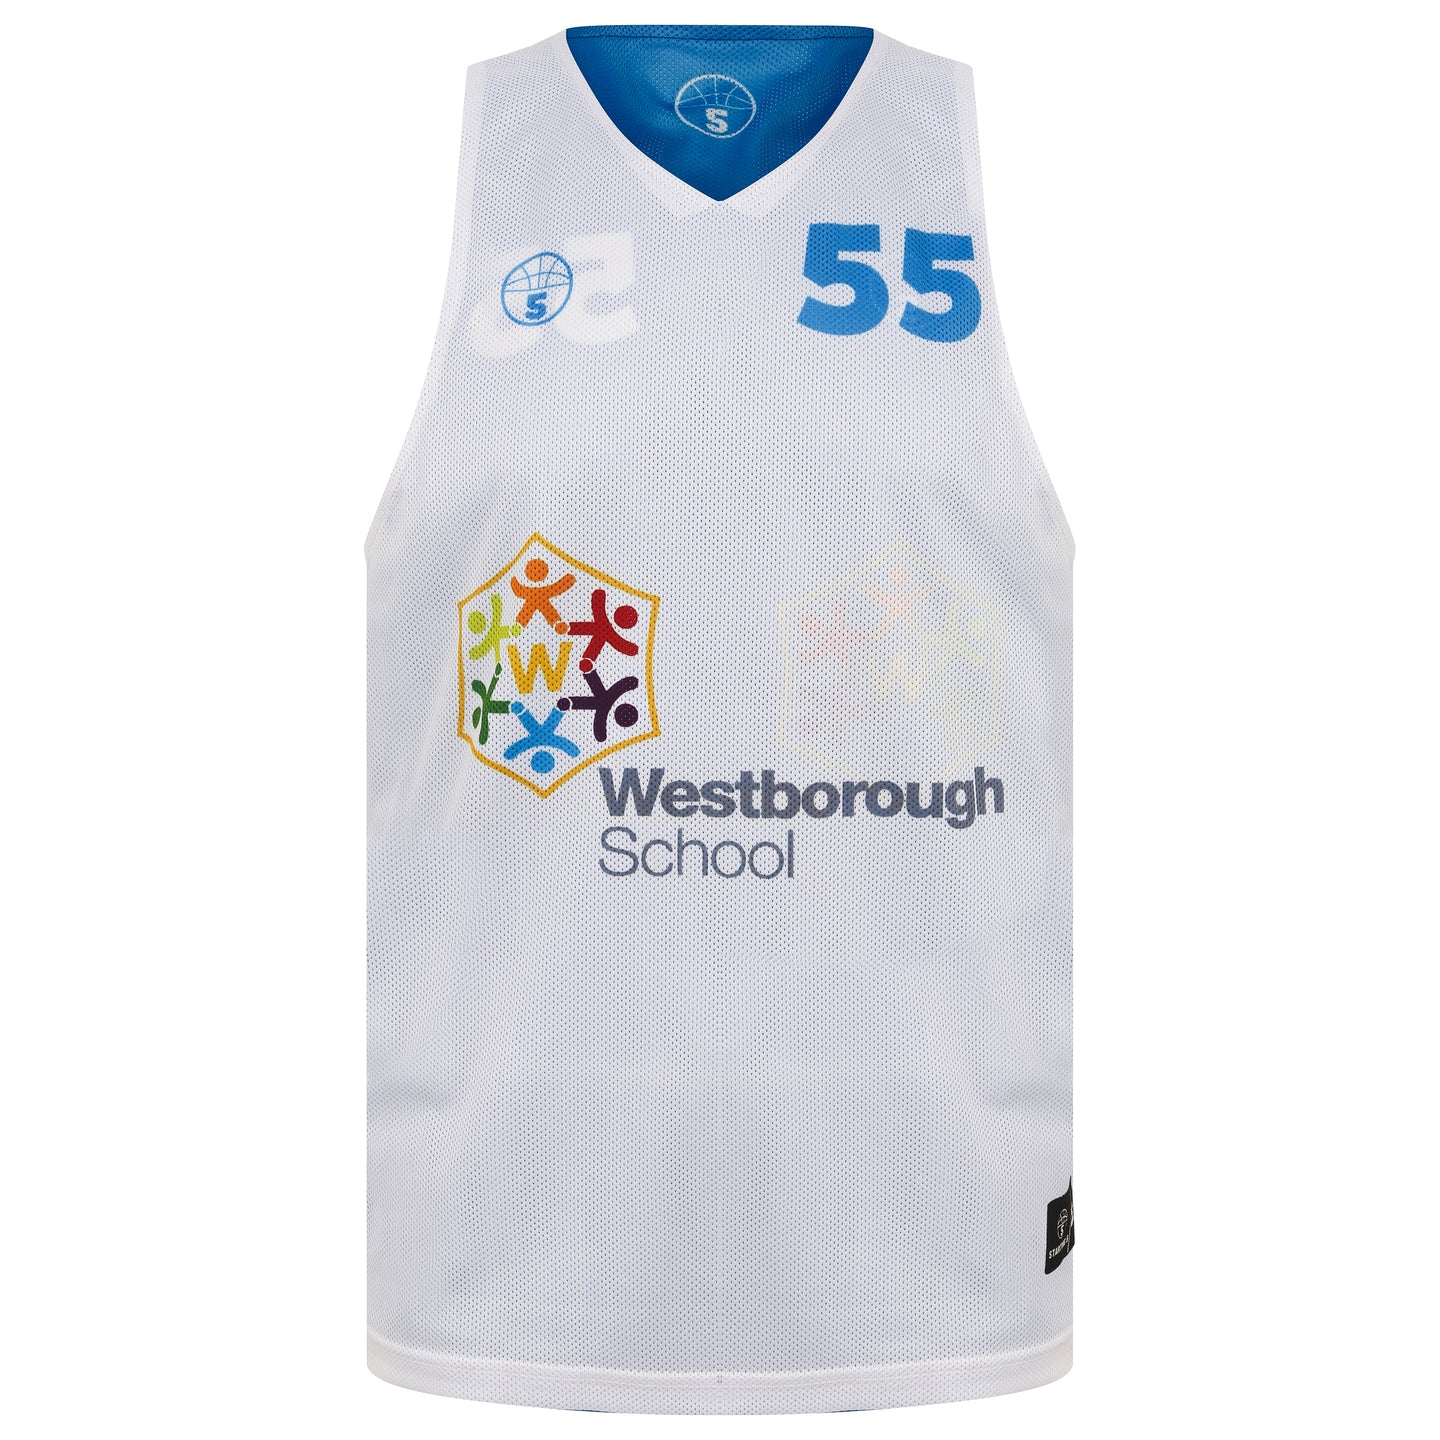 STARTING 5 Sublimated Mesh Reversible Training Vest - Example 4 (Matching Shorts Available)